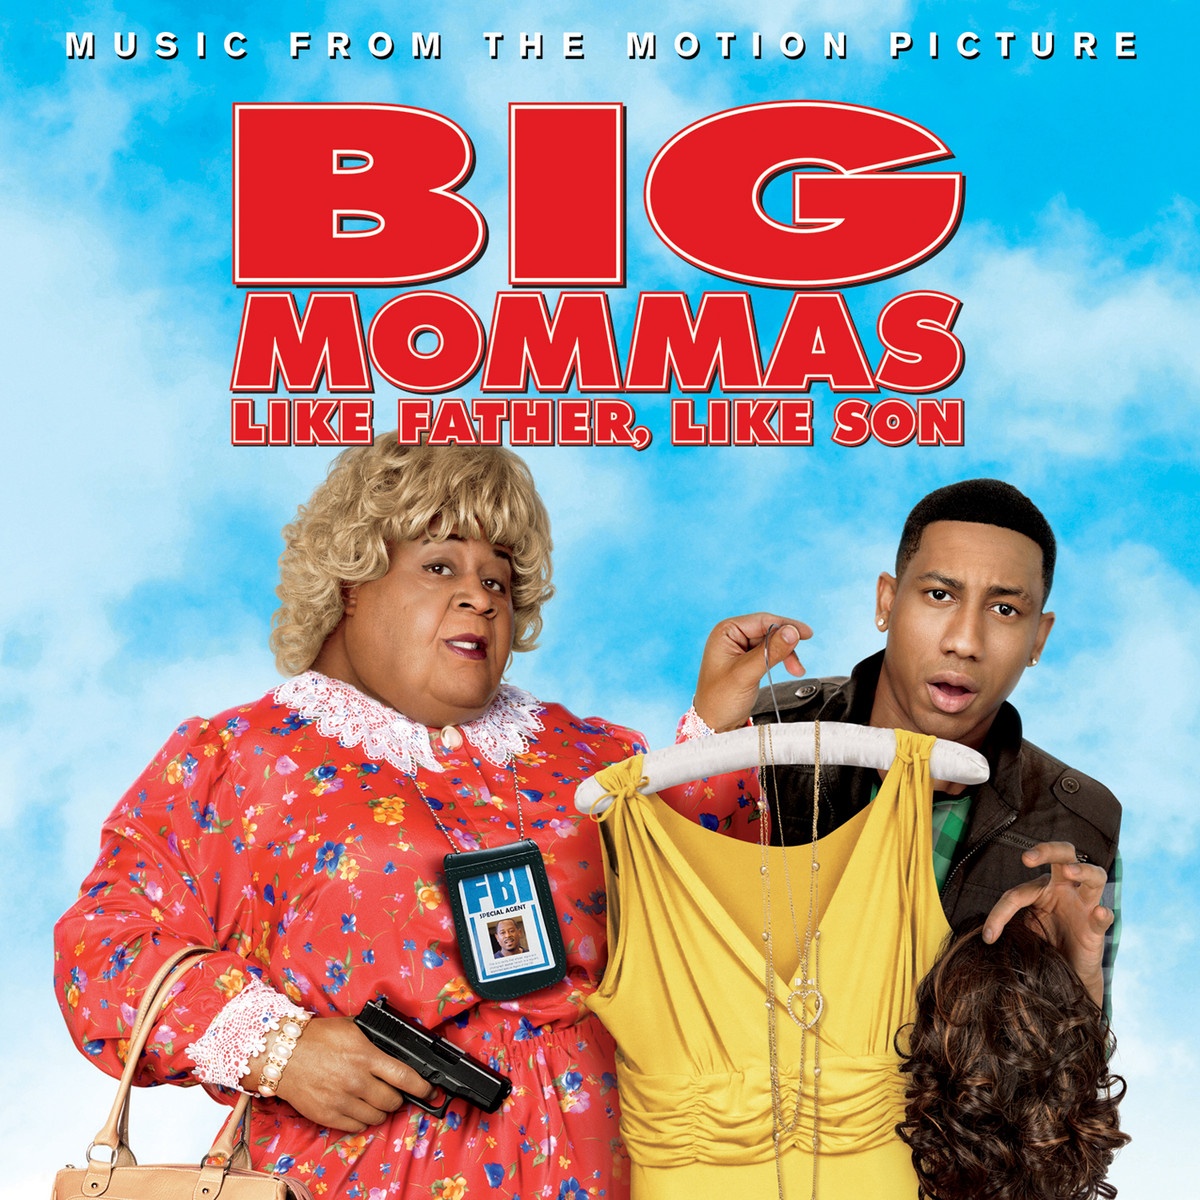 Big Mommas: Like Father, Like Son (Music from the Motion Picture)